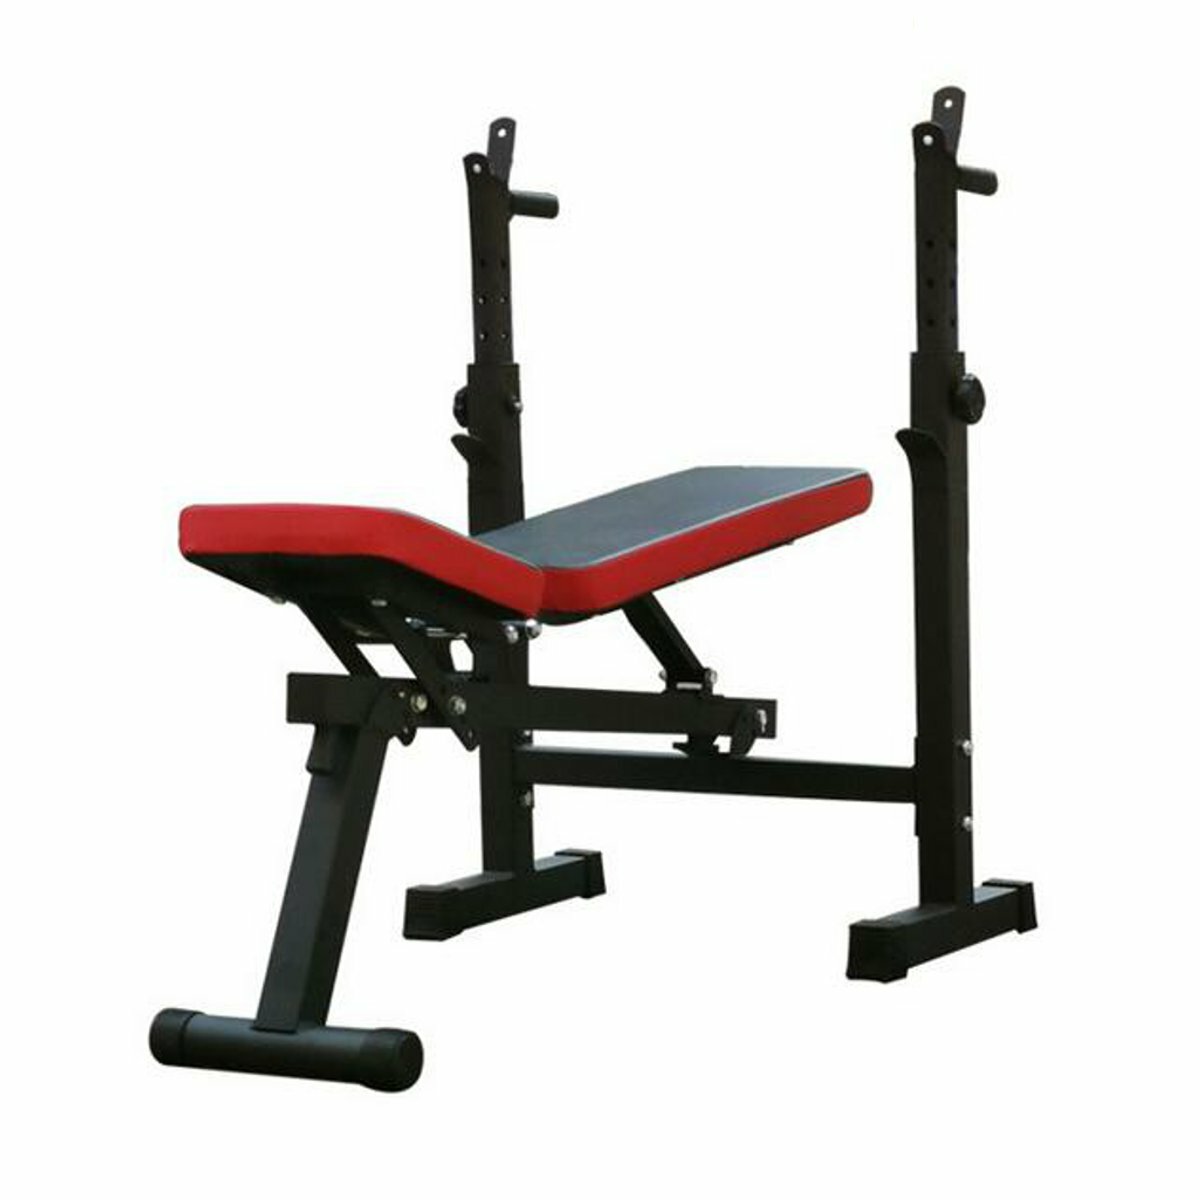 Adjustable Folding Sit Up Bench Abdominal Muscles Strength Training Barbell Squat Rack Home Gym Fitn